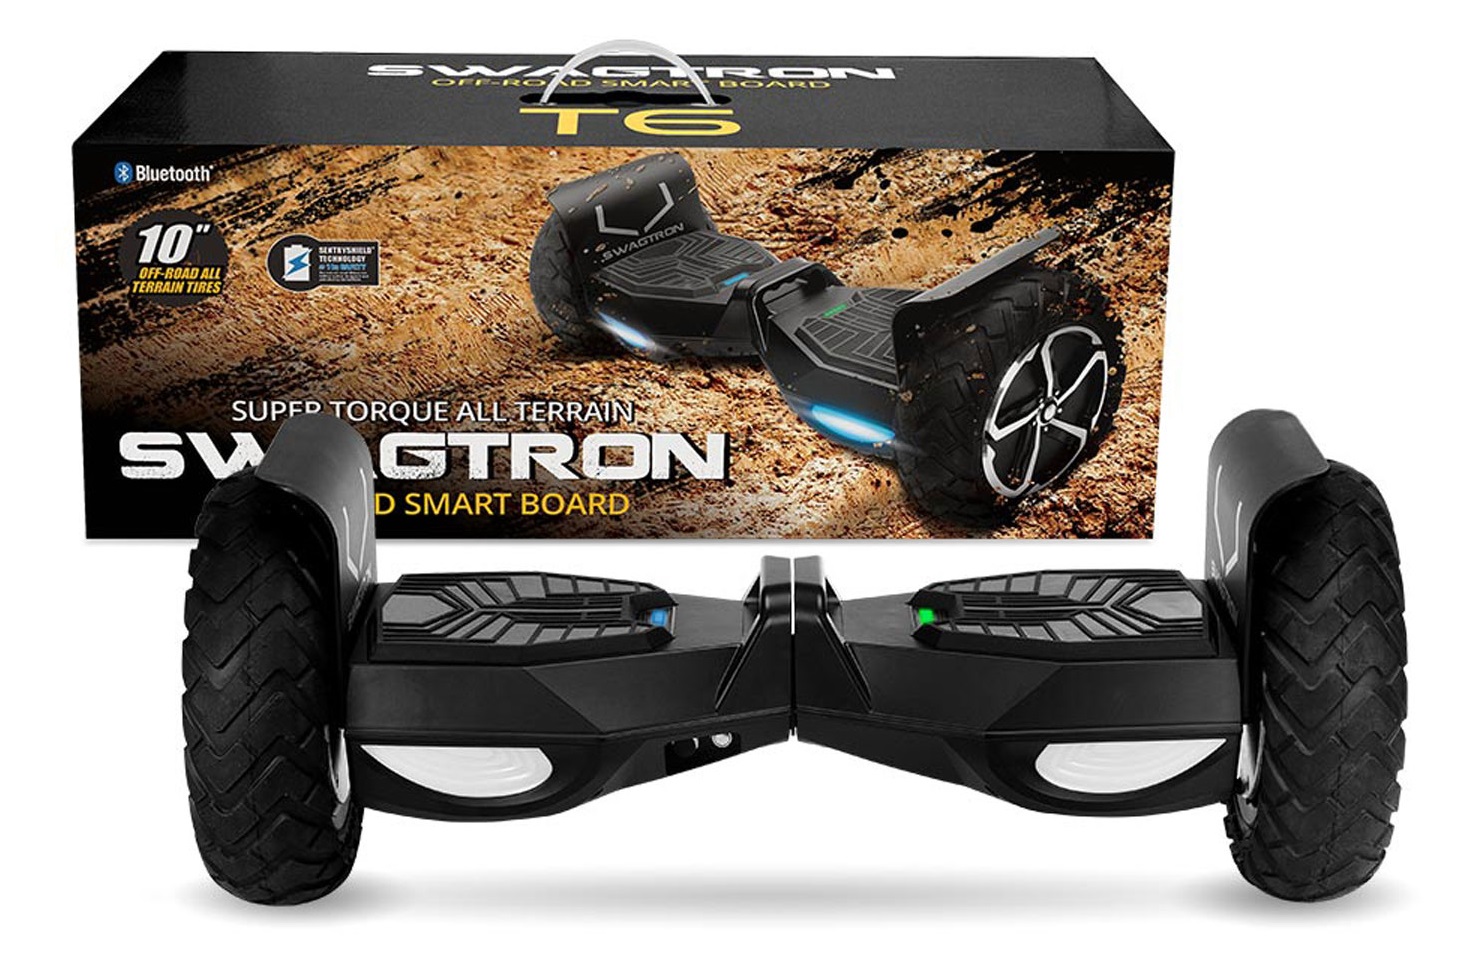 Swagtron all terrain Hoverboard